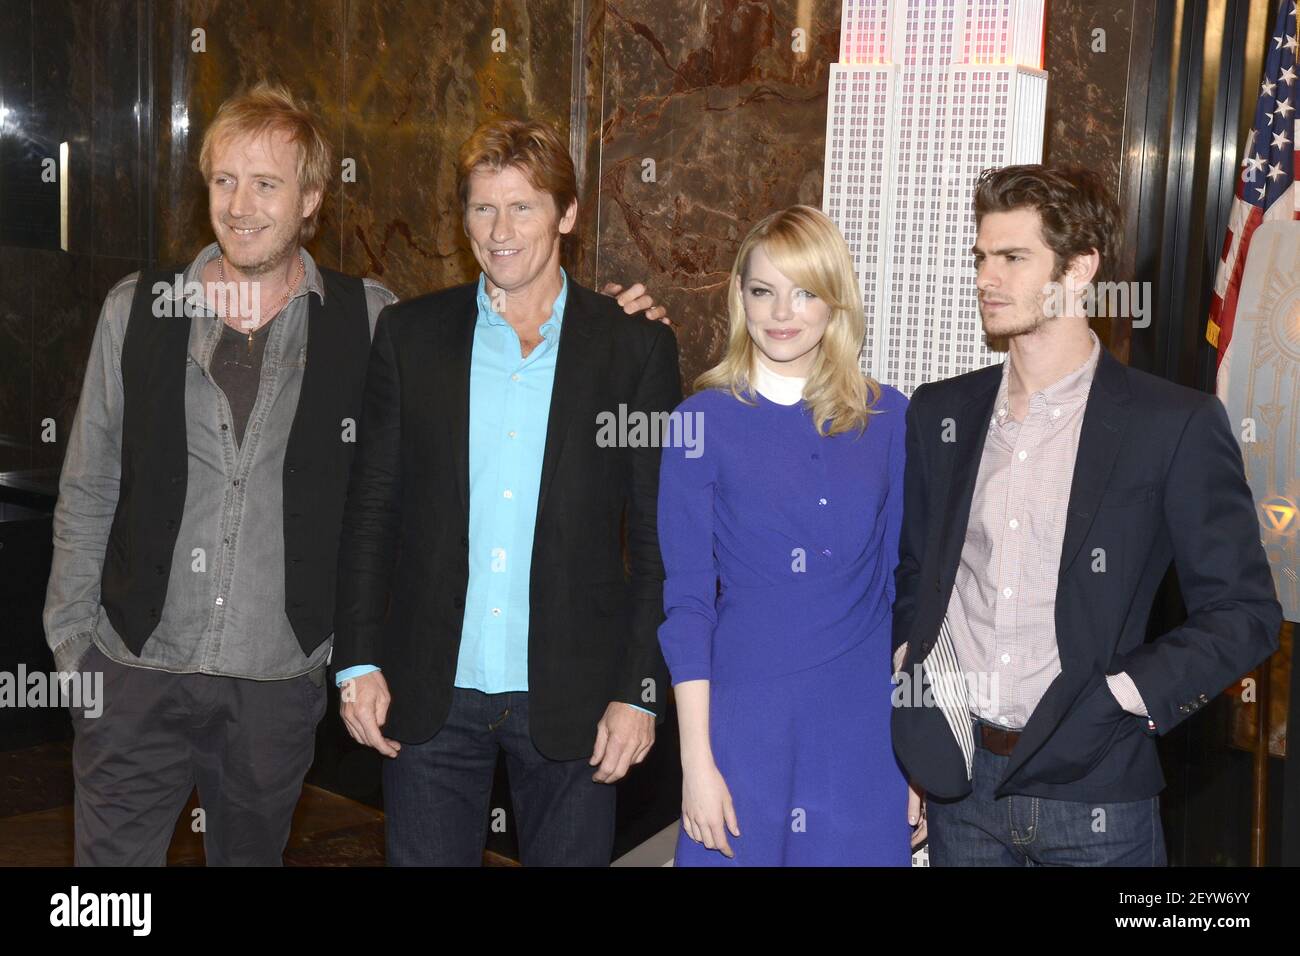 Emma Stone and Andrew Garfield The cast of 'The Amazing Spider-Man' at the  Lighting Ceremony at The Empire State Building New York City, USA -  25.06.12 Stock Photo - Alamy